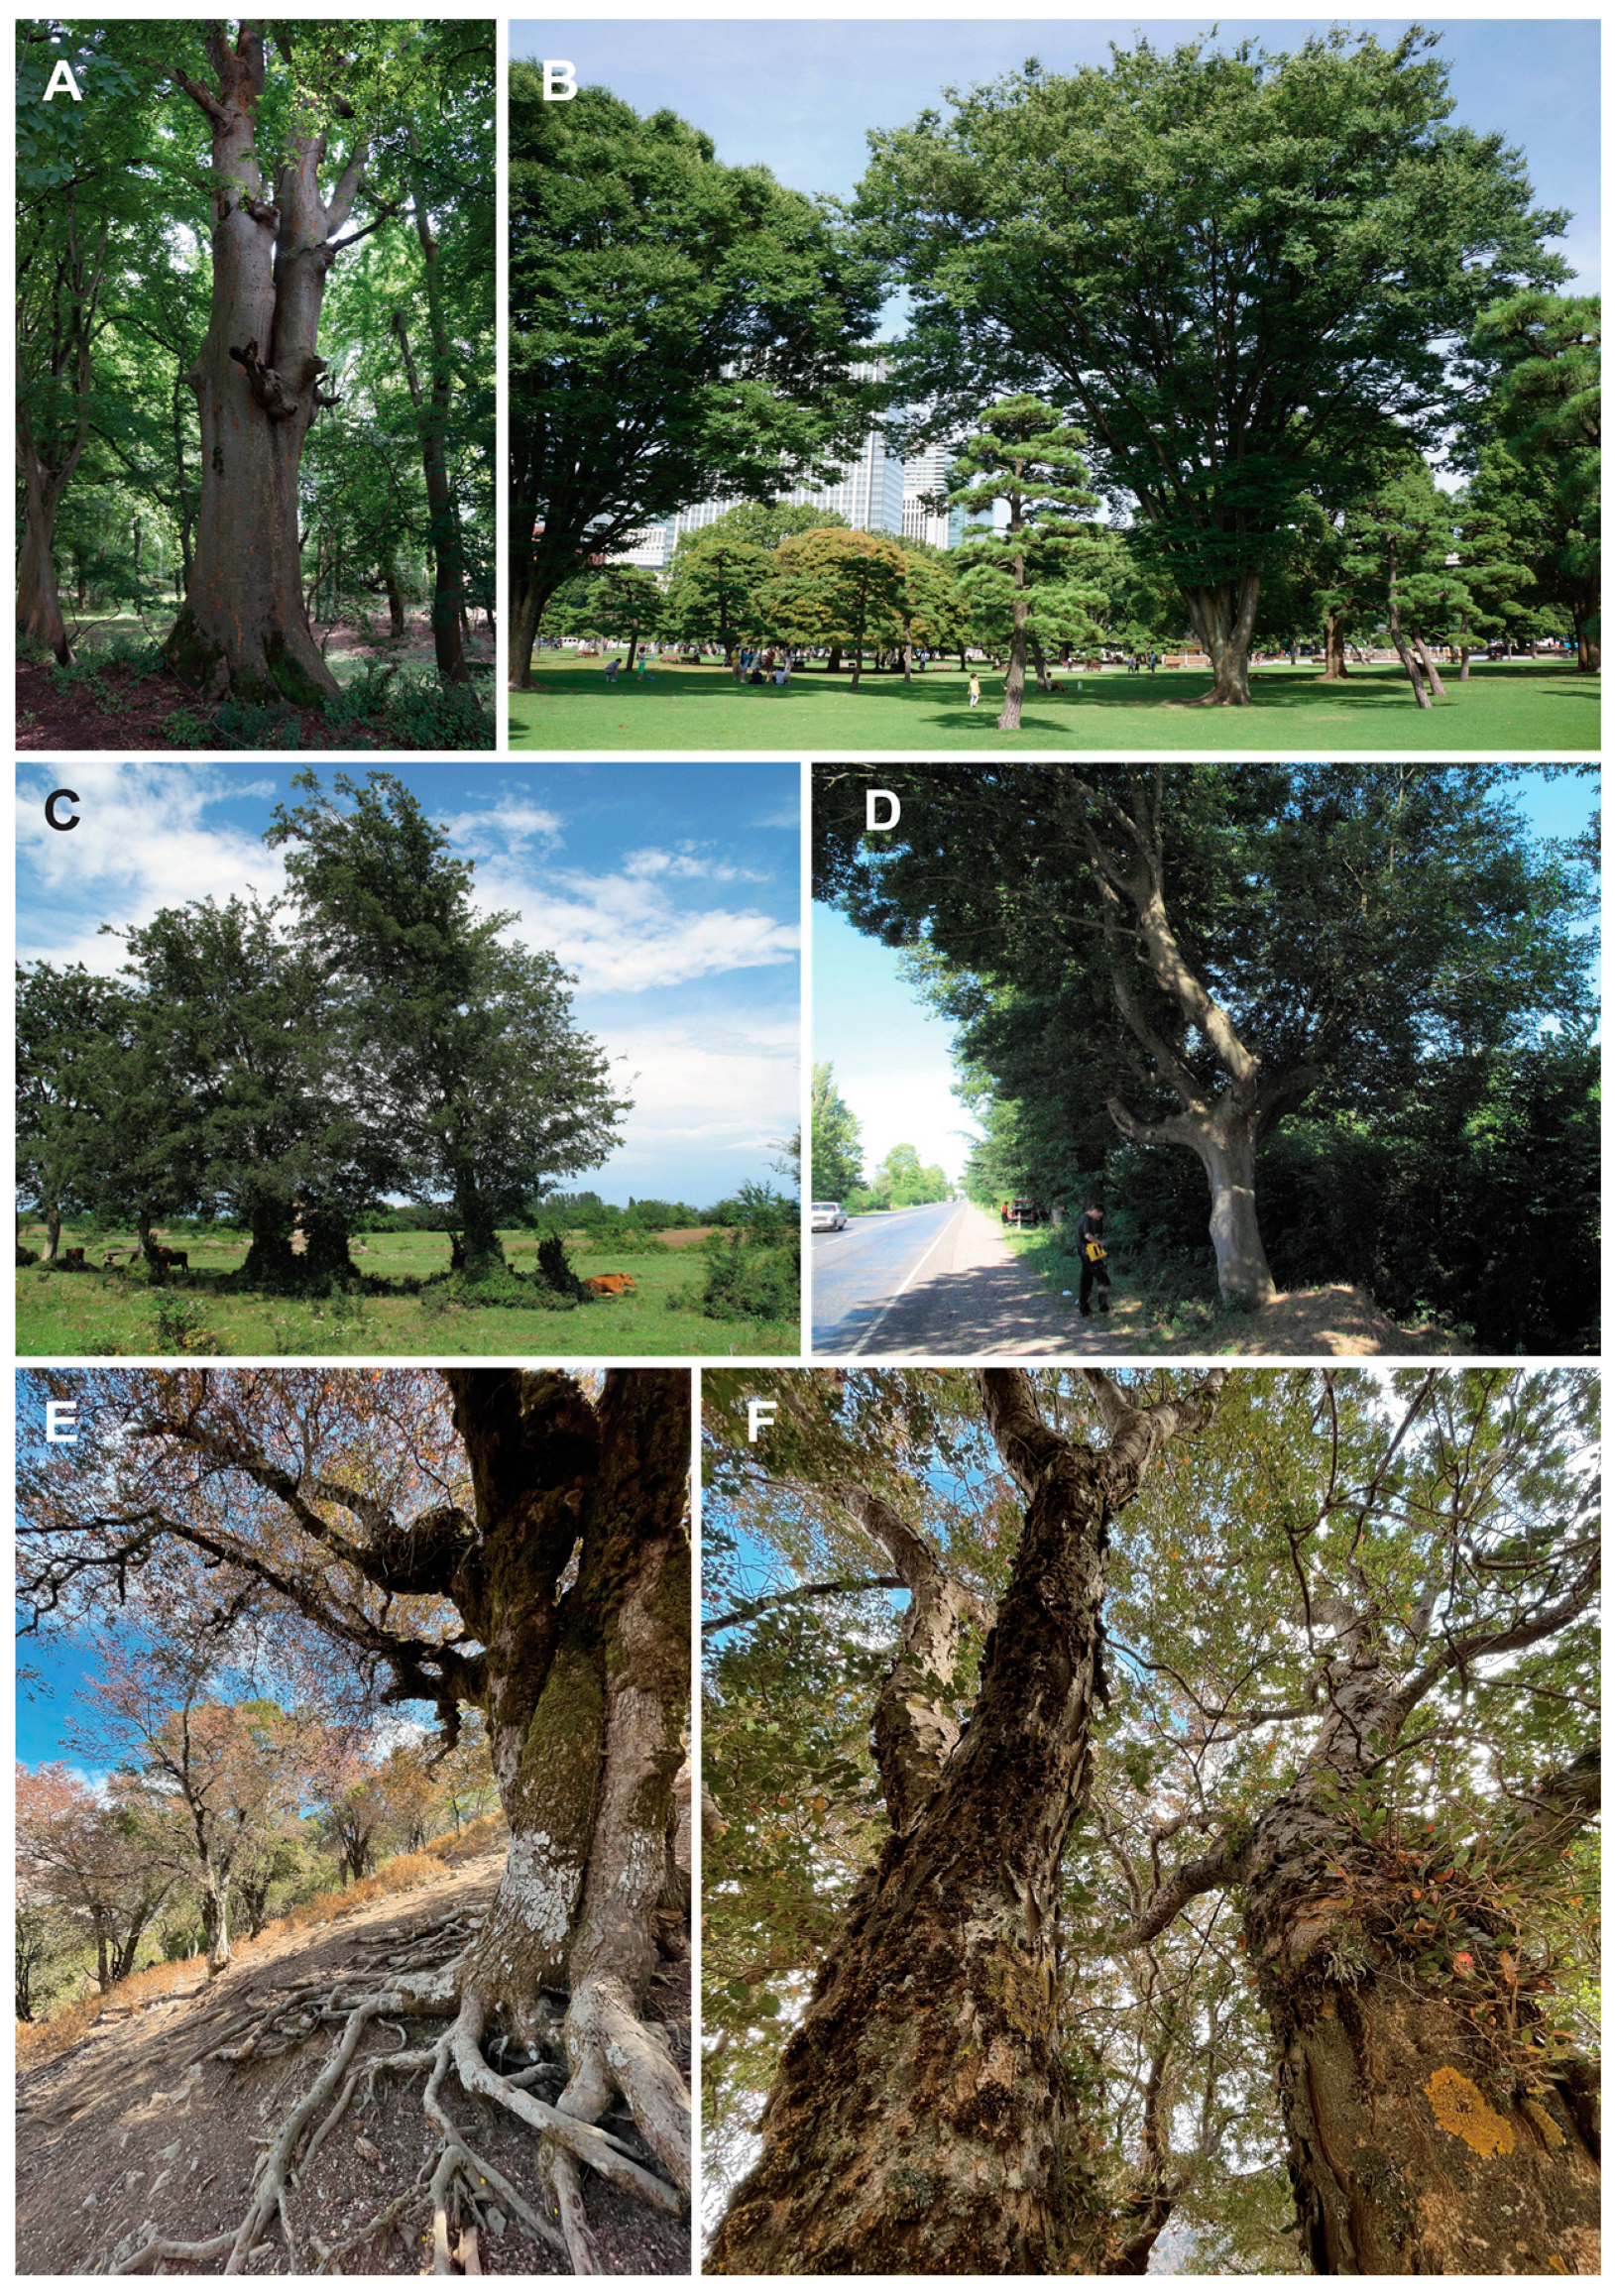 different types of trees